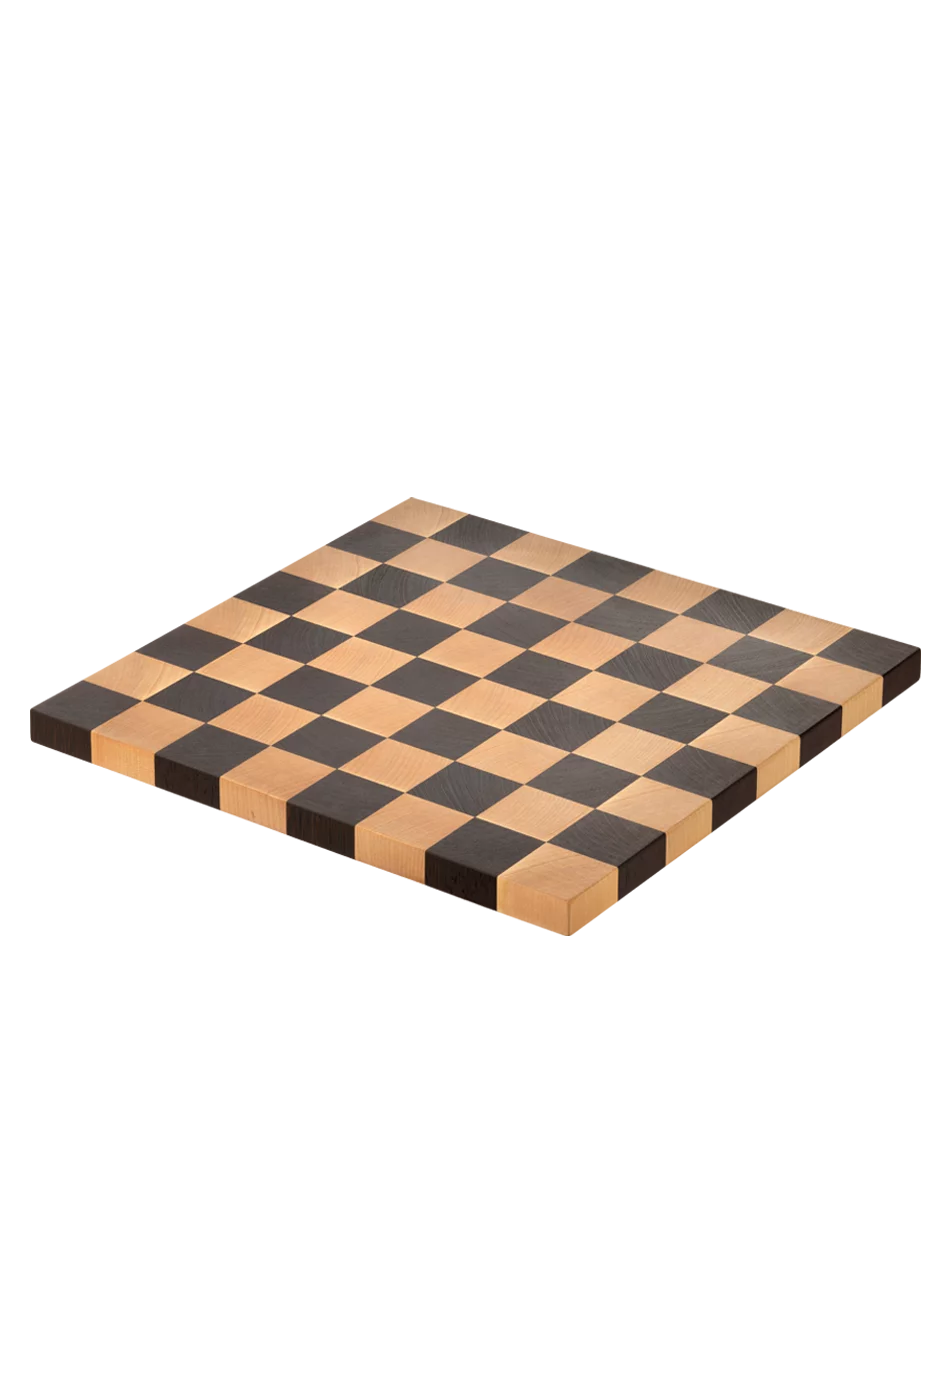 Chessboard maple and wengé